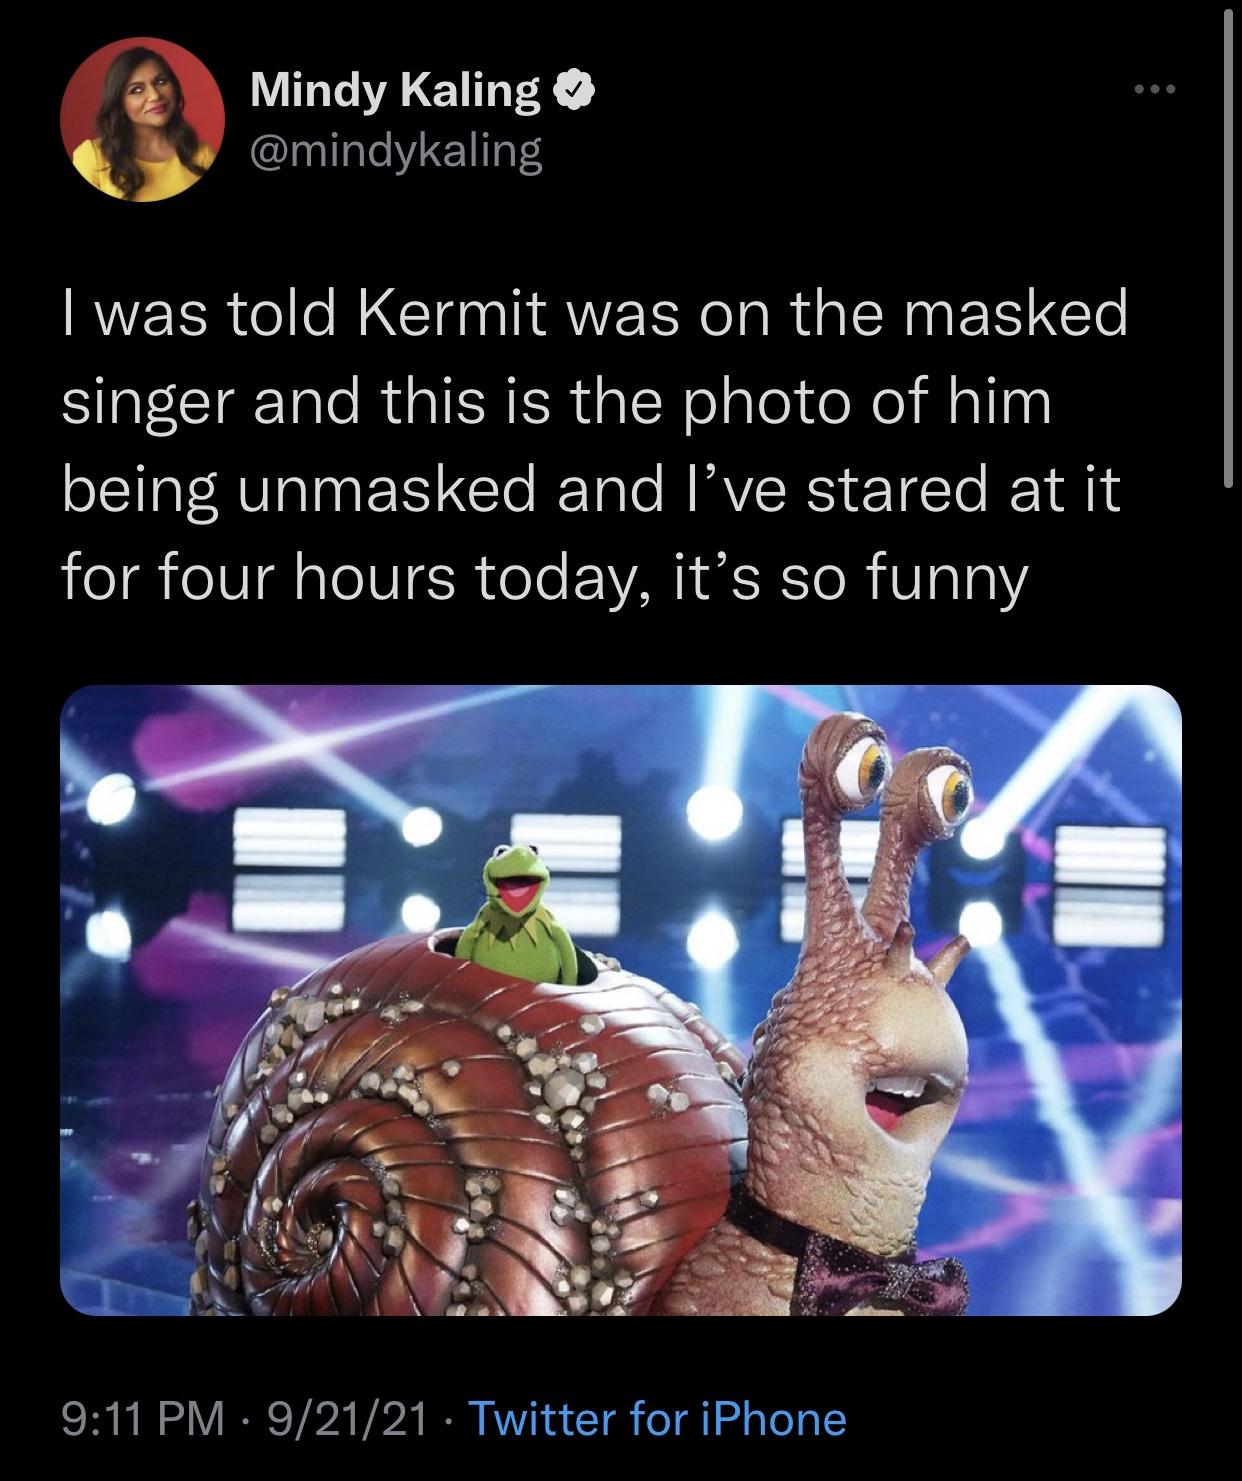 funny memes - hilarious memes - kermit masked singer - Mindy Kaling I was told Kermit was on the masked singer and this is the photo of him being unmasked and I've stared at it for four hours today, it's so funny 92121 Twitter for iPhone